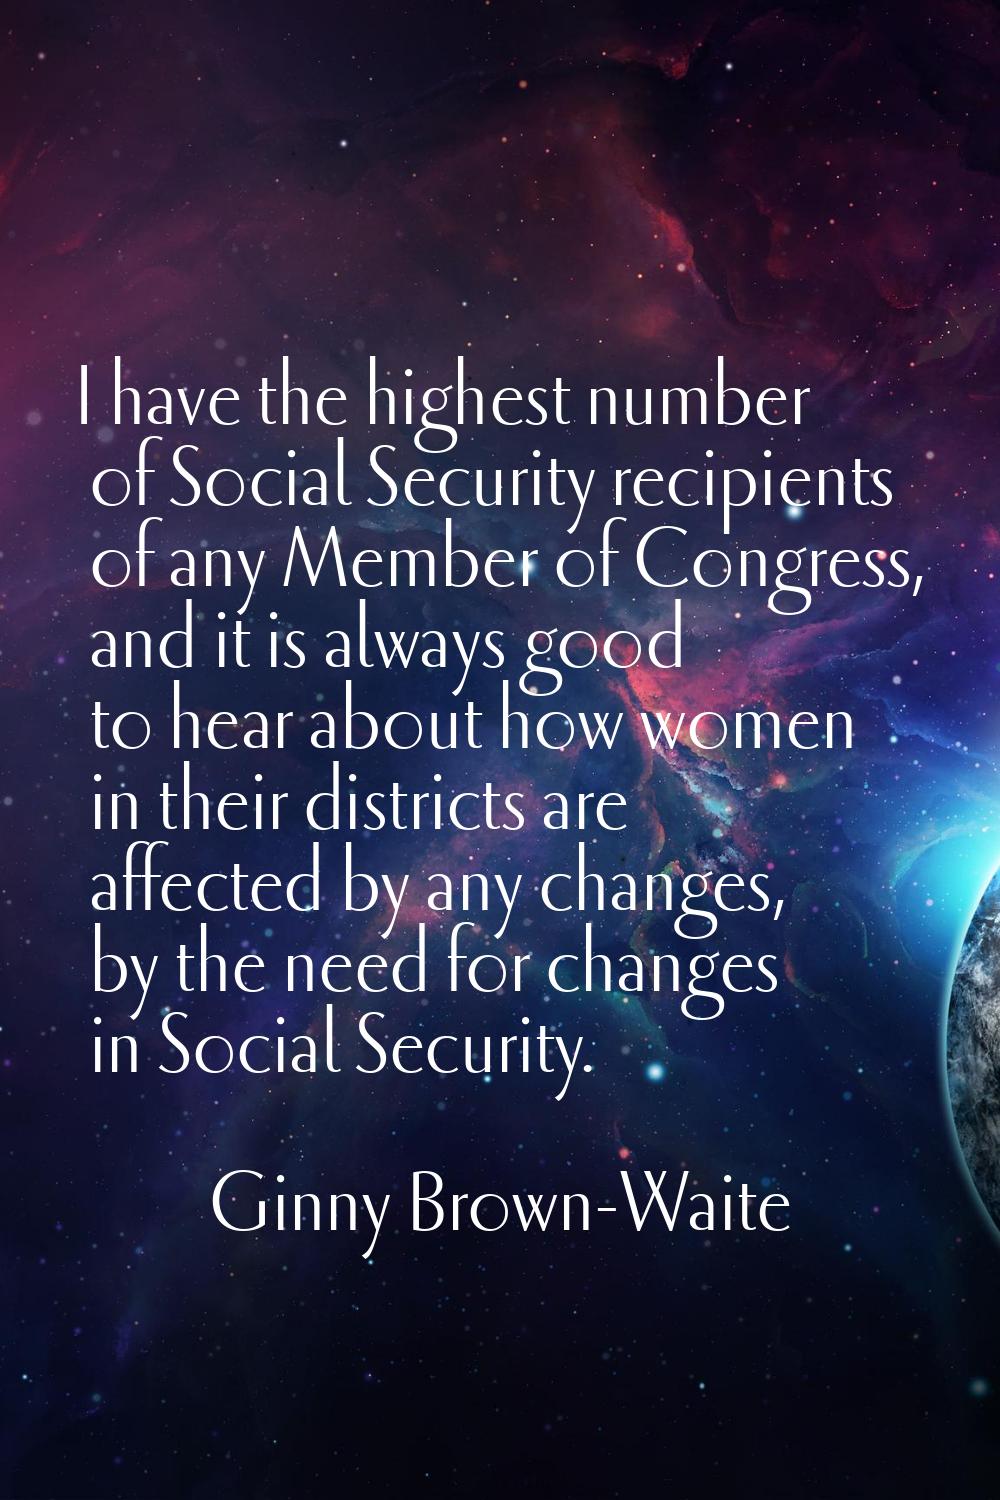 I have the highest number of Social Security recipients of any Member of Congress, and it is always